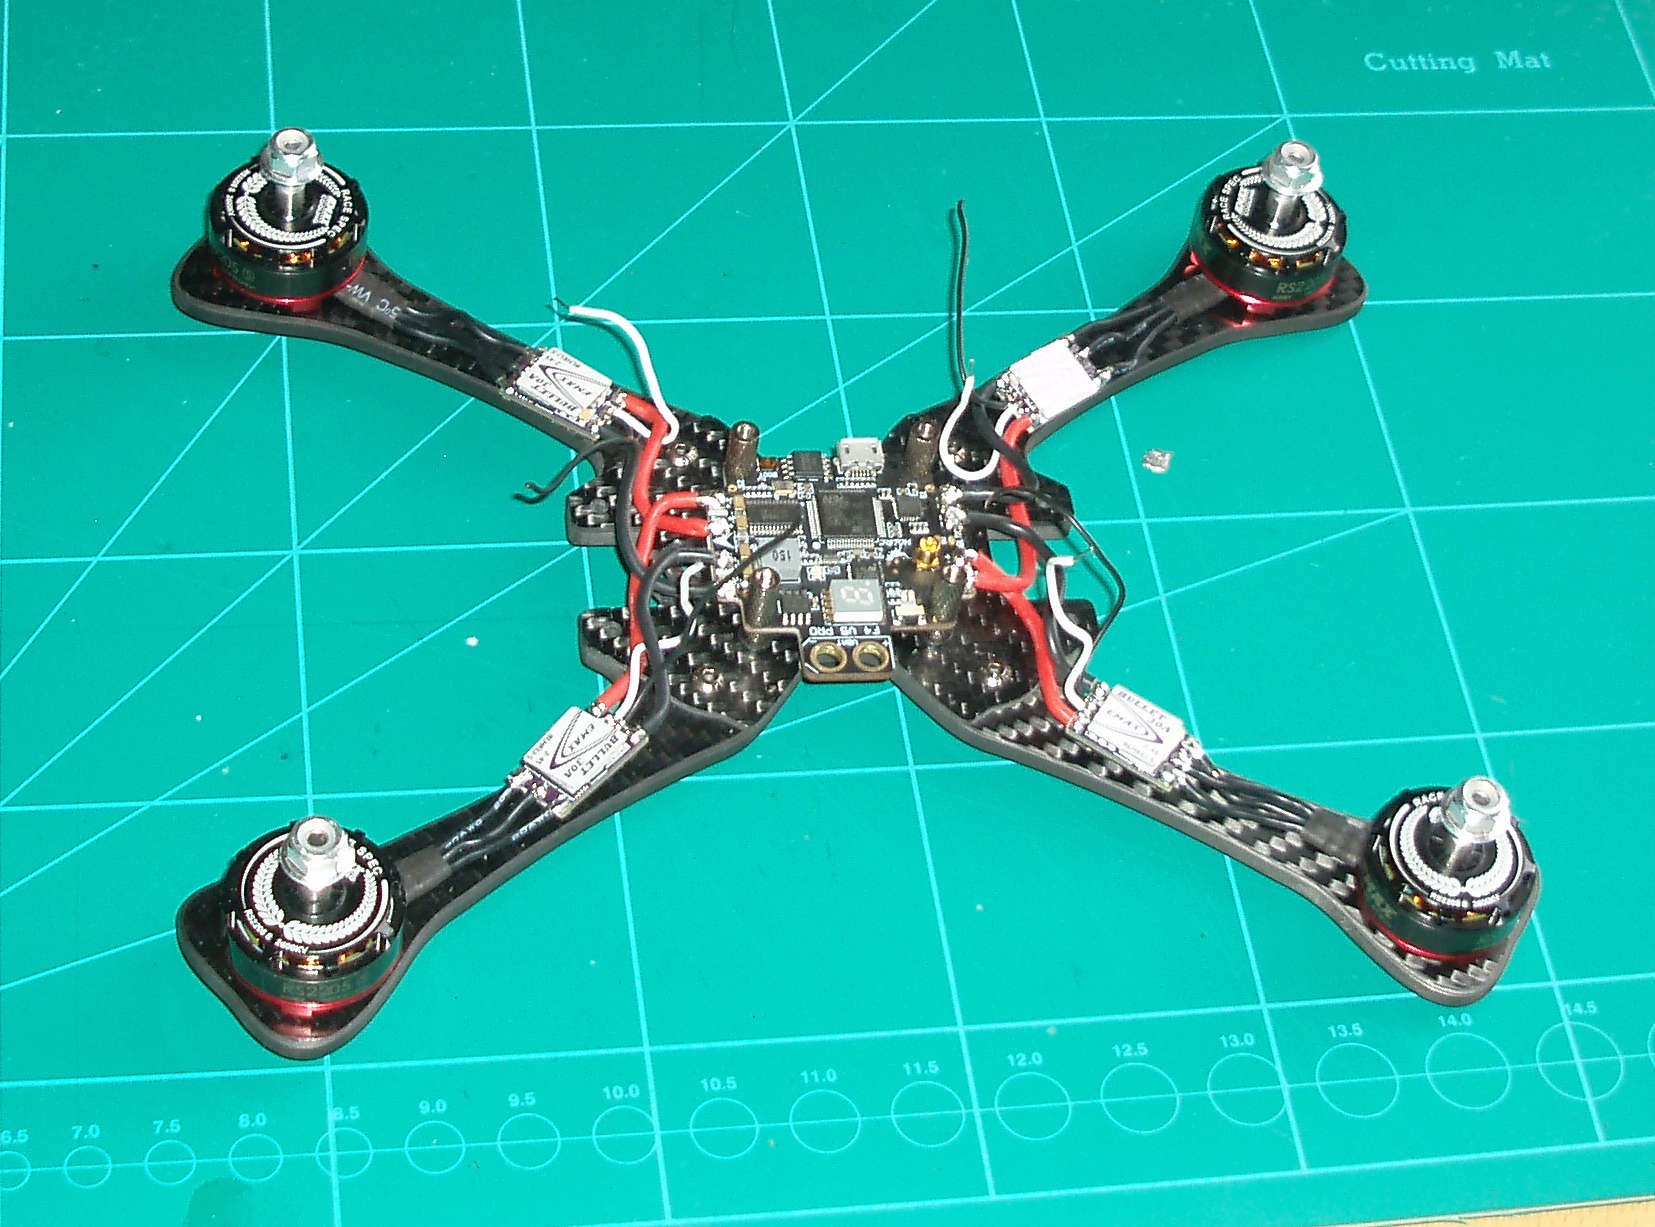 Andys awesome quad builds. Q110